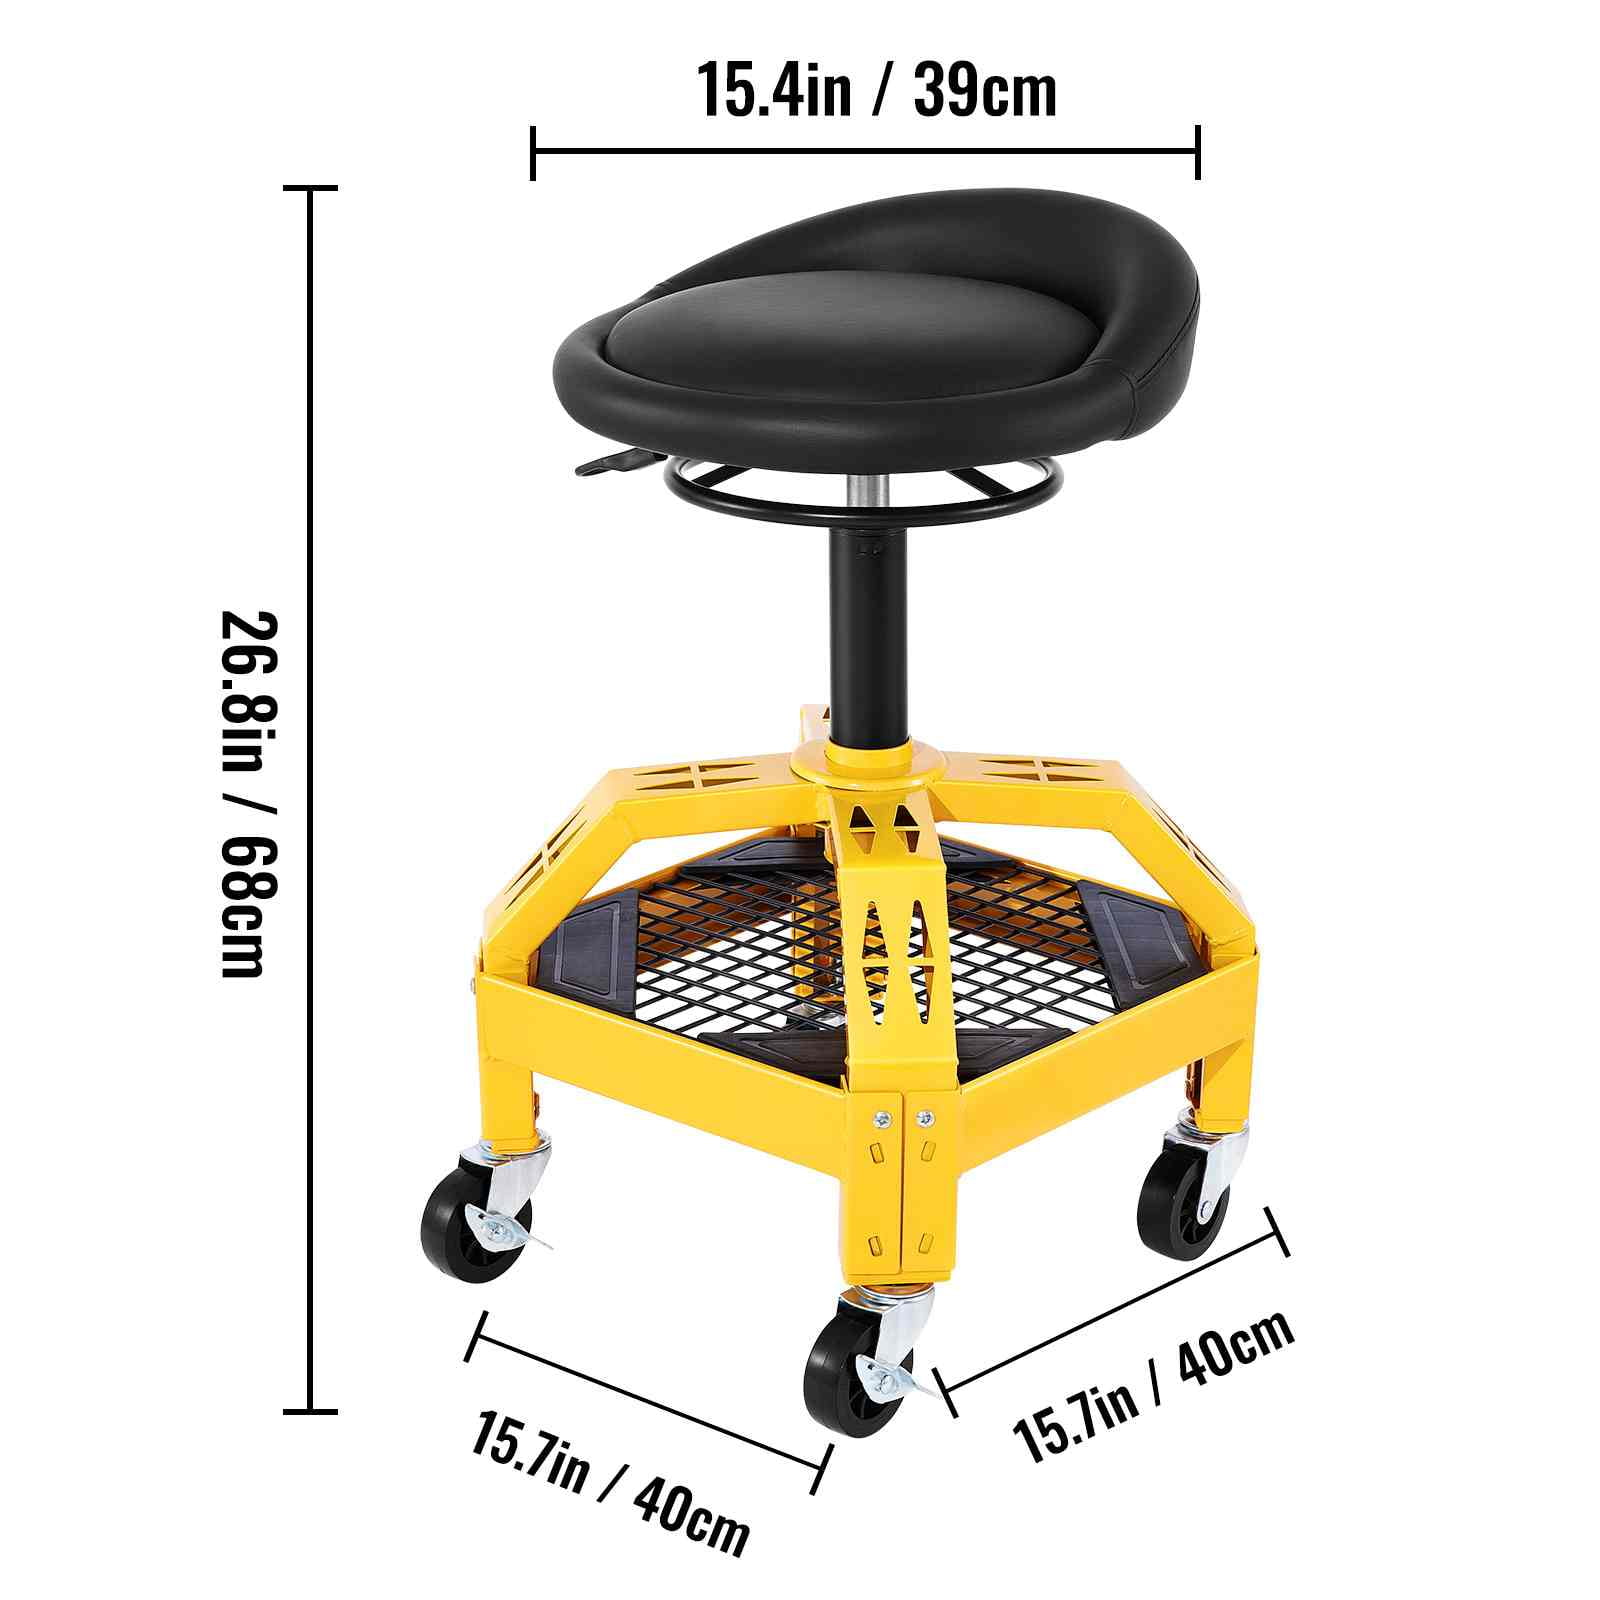 Heavy Duty Shop Rolling stools for Work Bench, Adjustable Height Rolling  Stool Medical On 5 Wheels,304 Stainless Steel Structure lab Office Stool